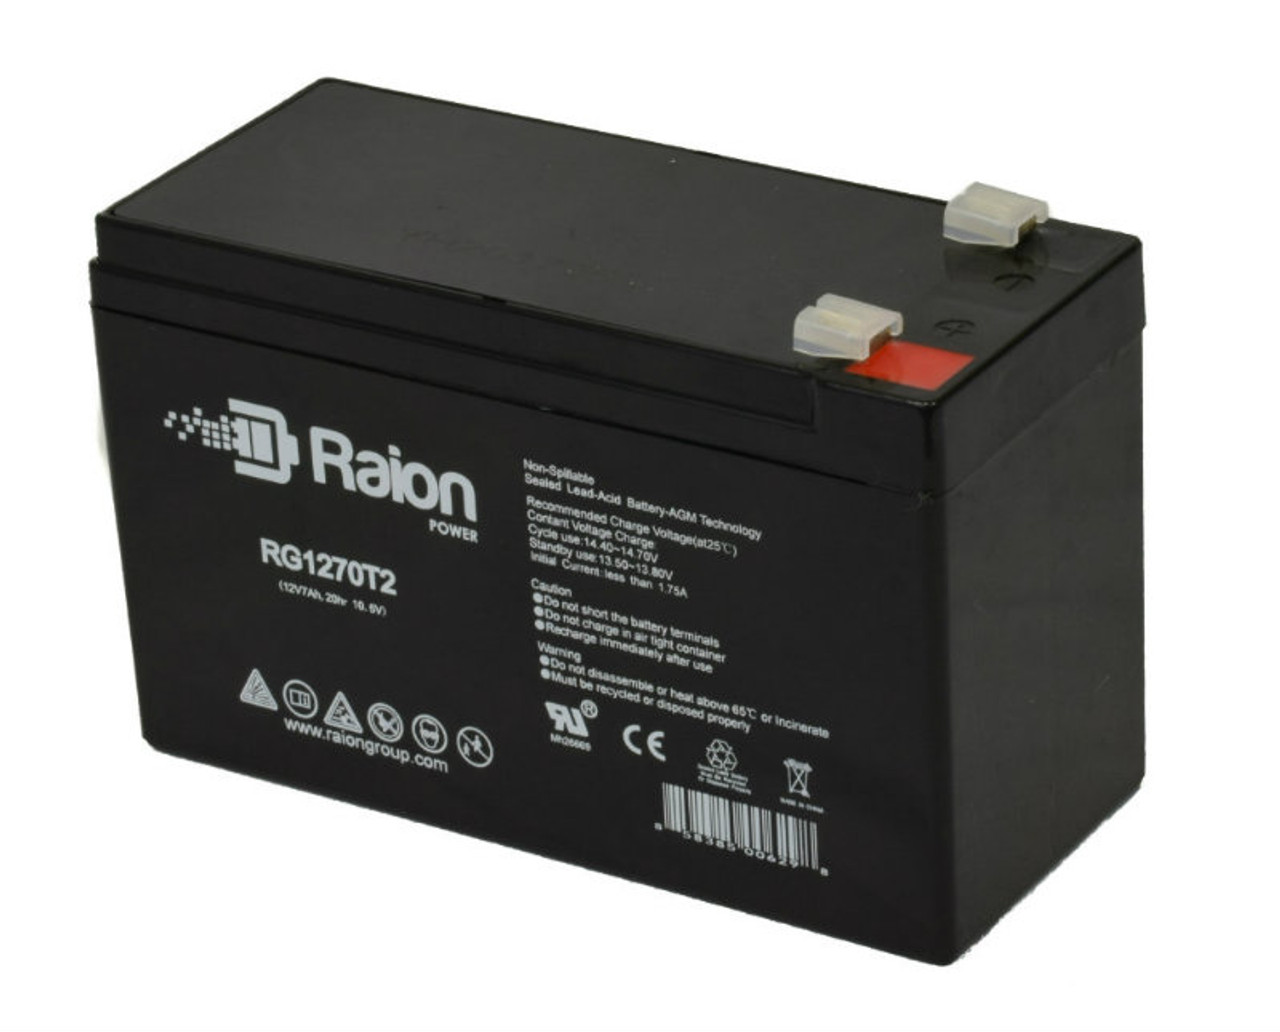 Raion Power Replacement 12V 7Ah Battery for Mule PM1270 F1 - 1 Pack